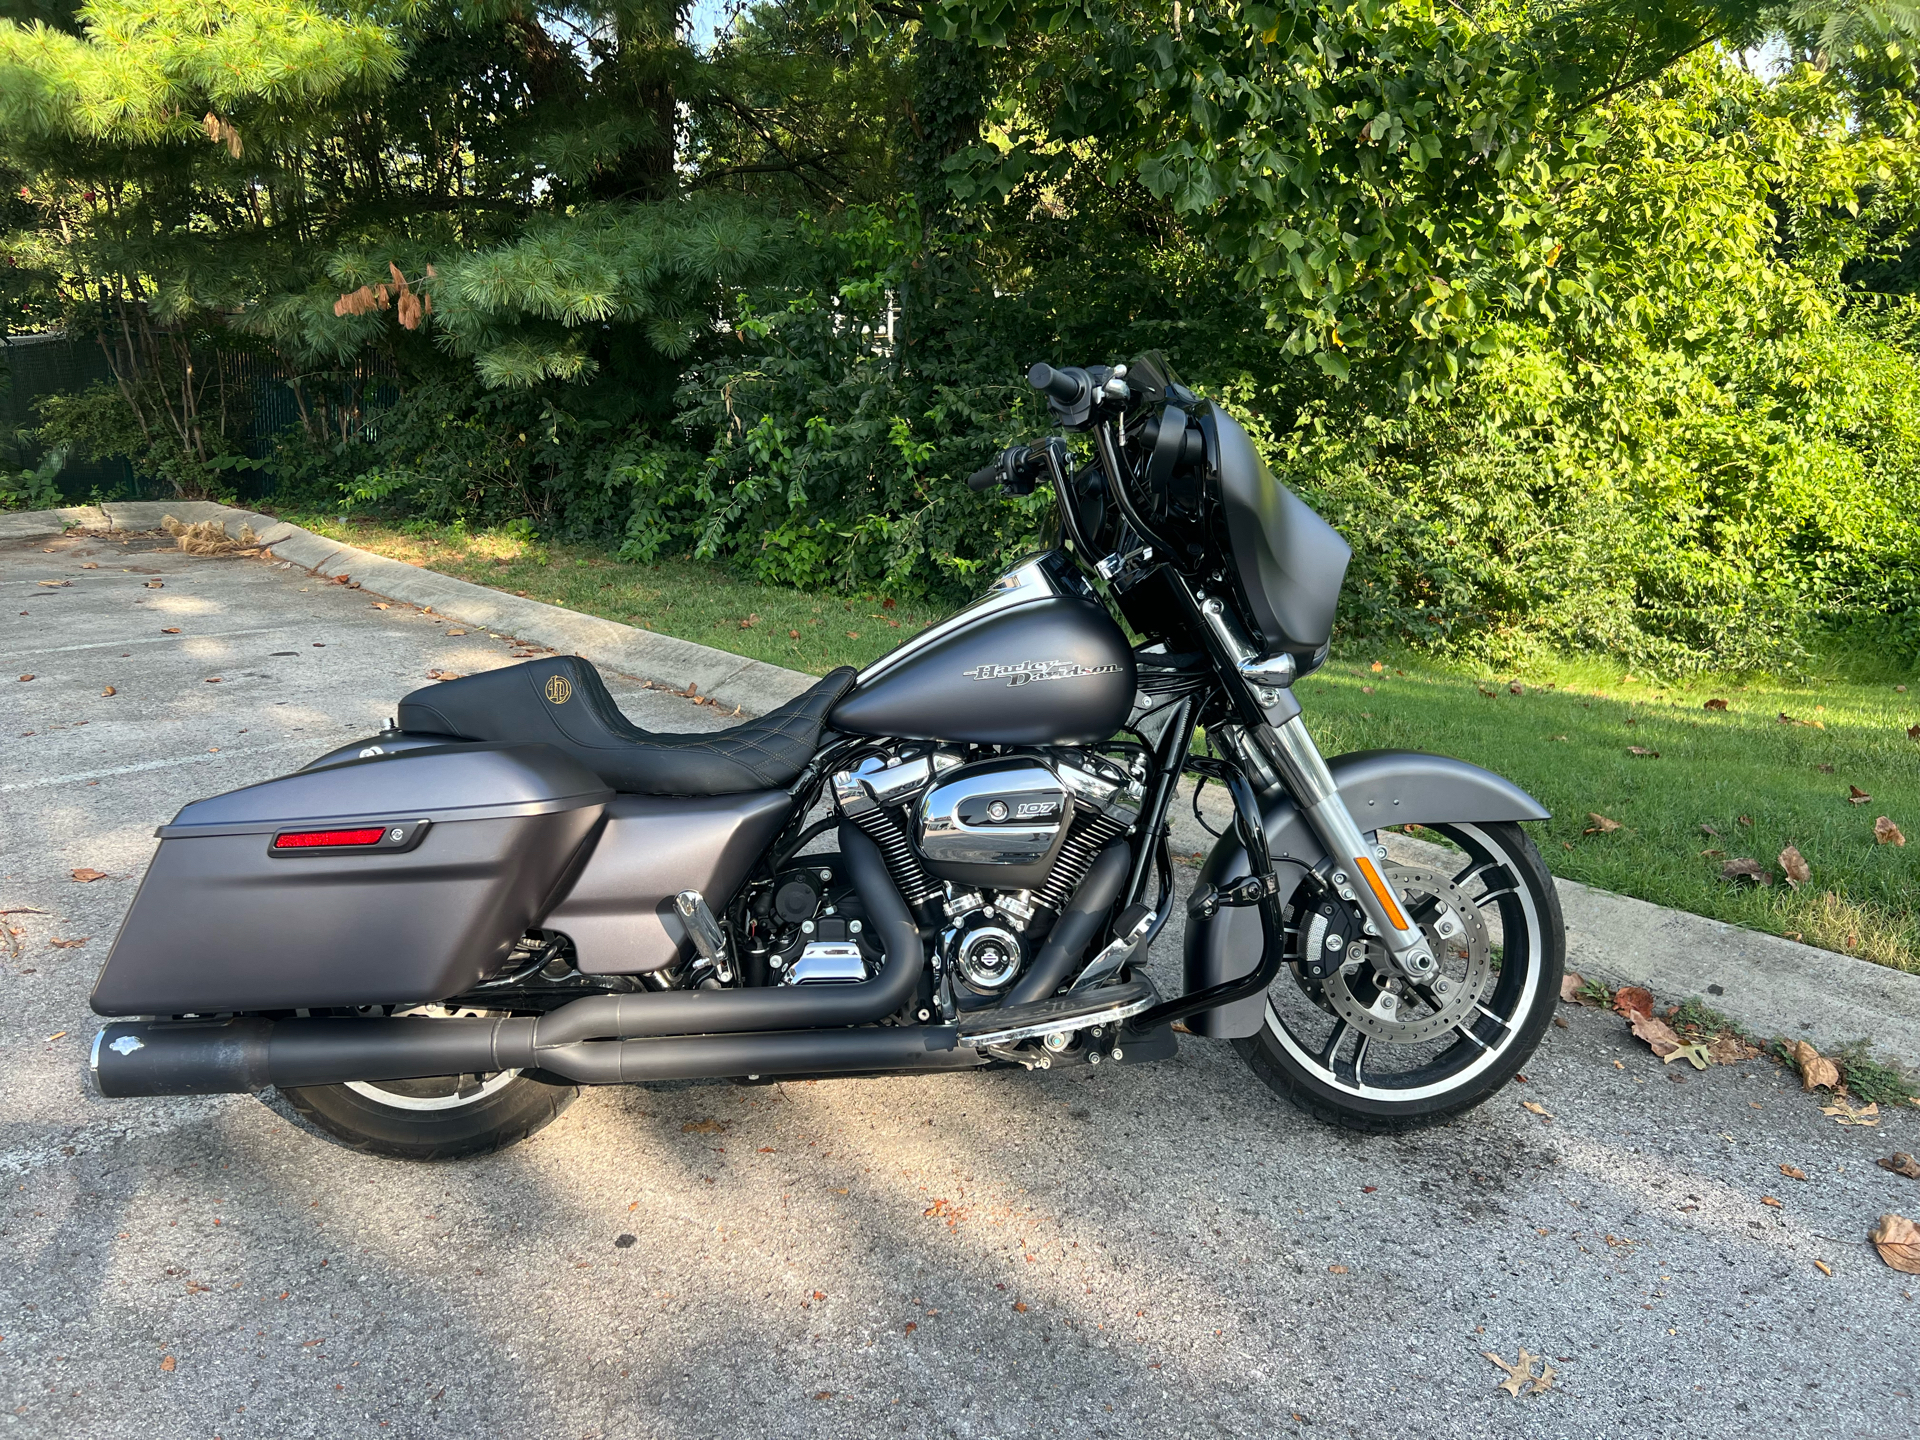 2017 Harley-Davidson Street Glide® Special in Franklin, Tennessee - Photo 1